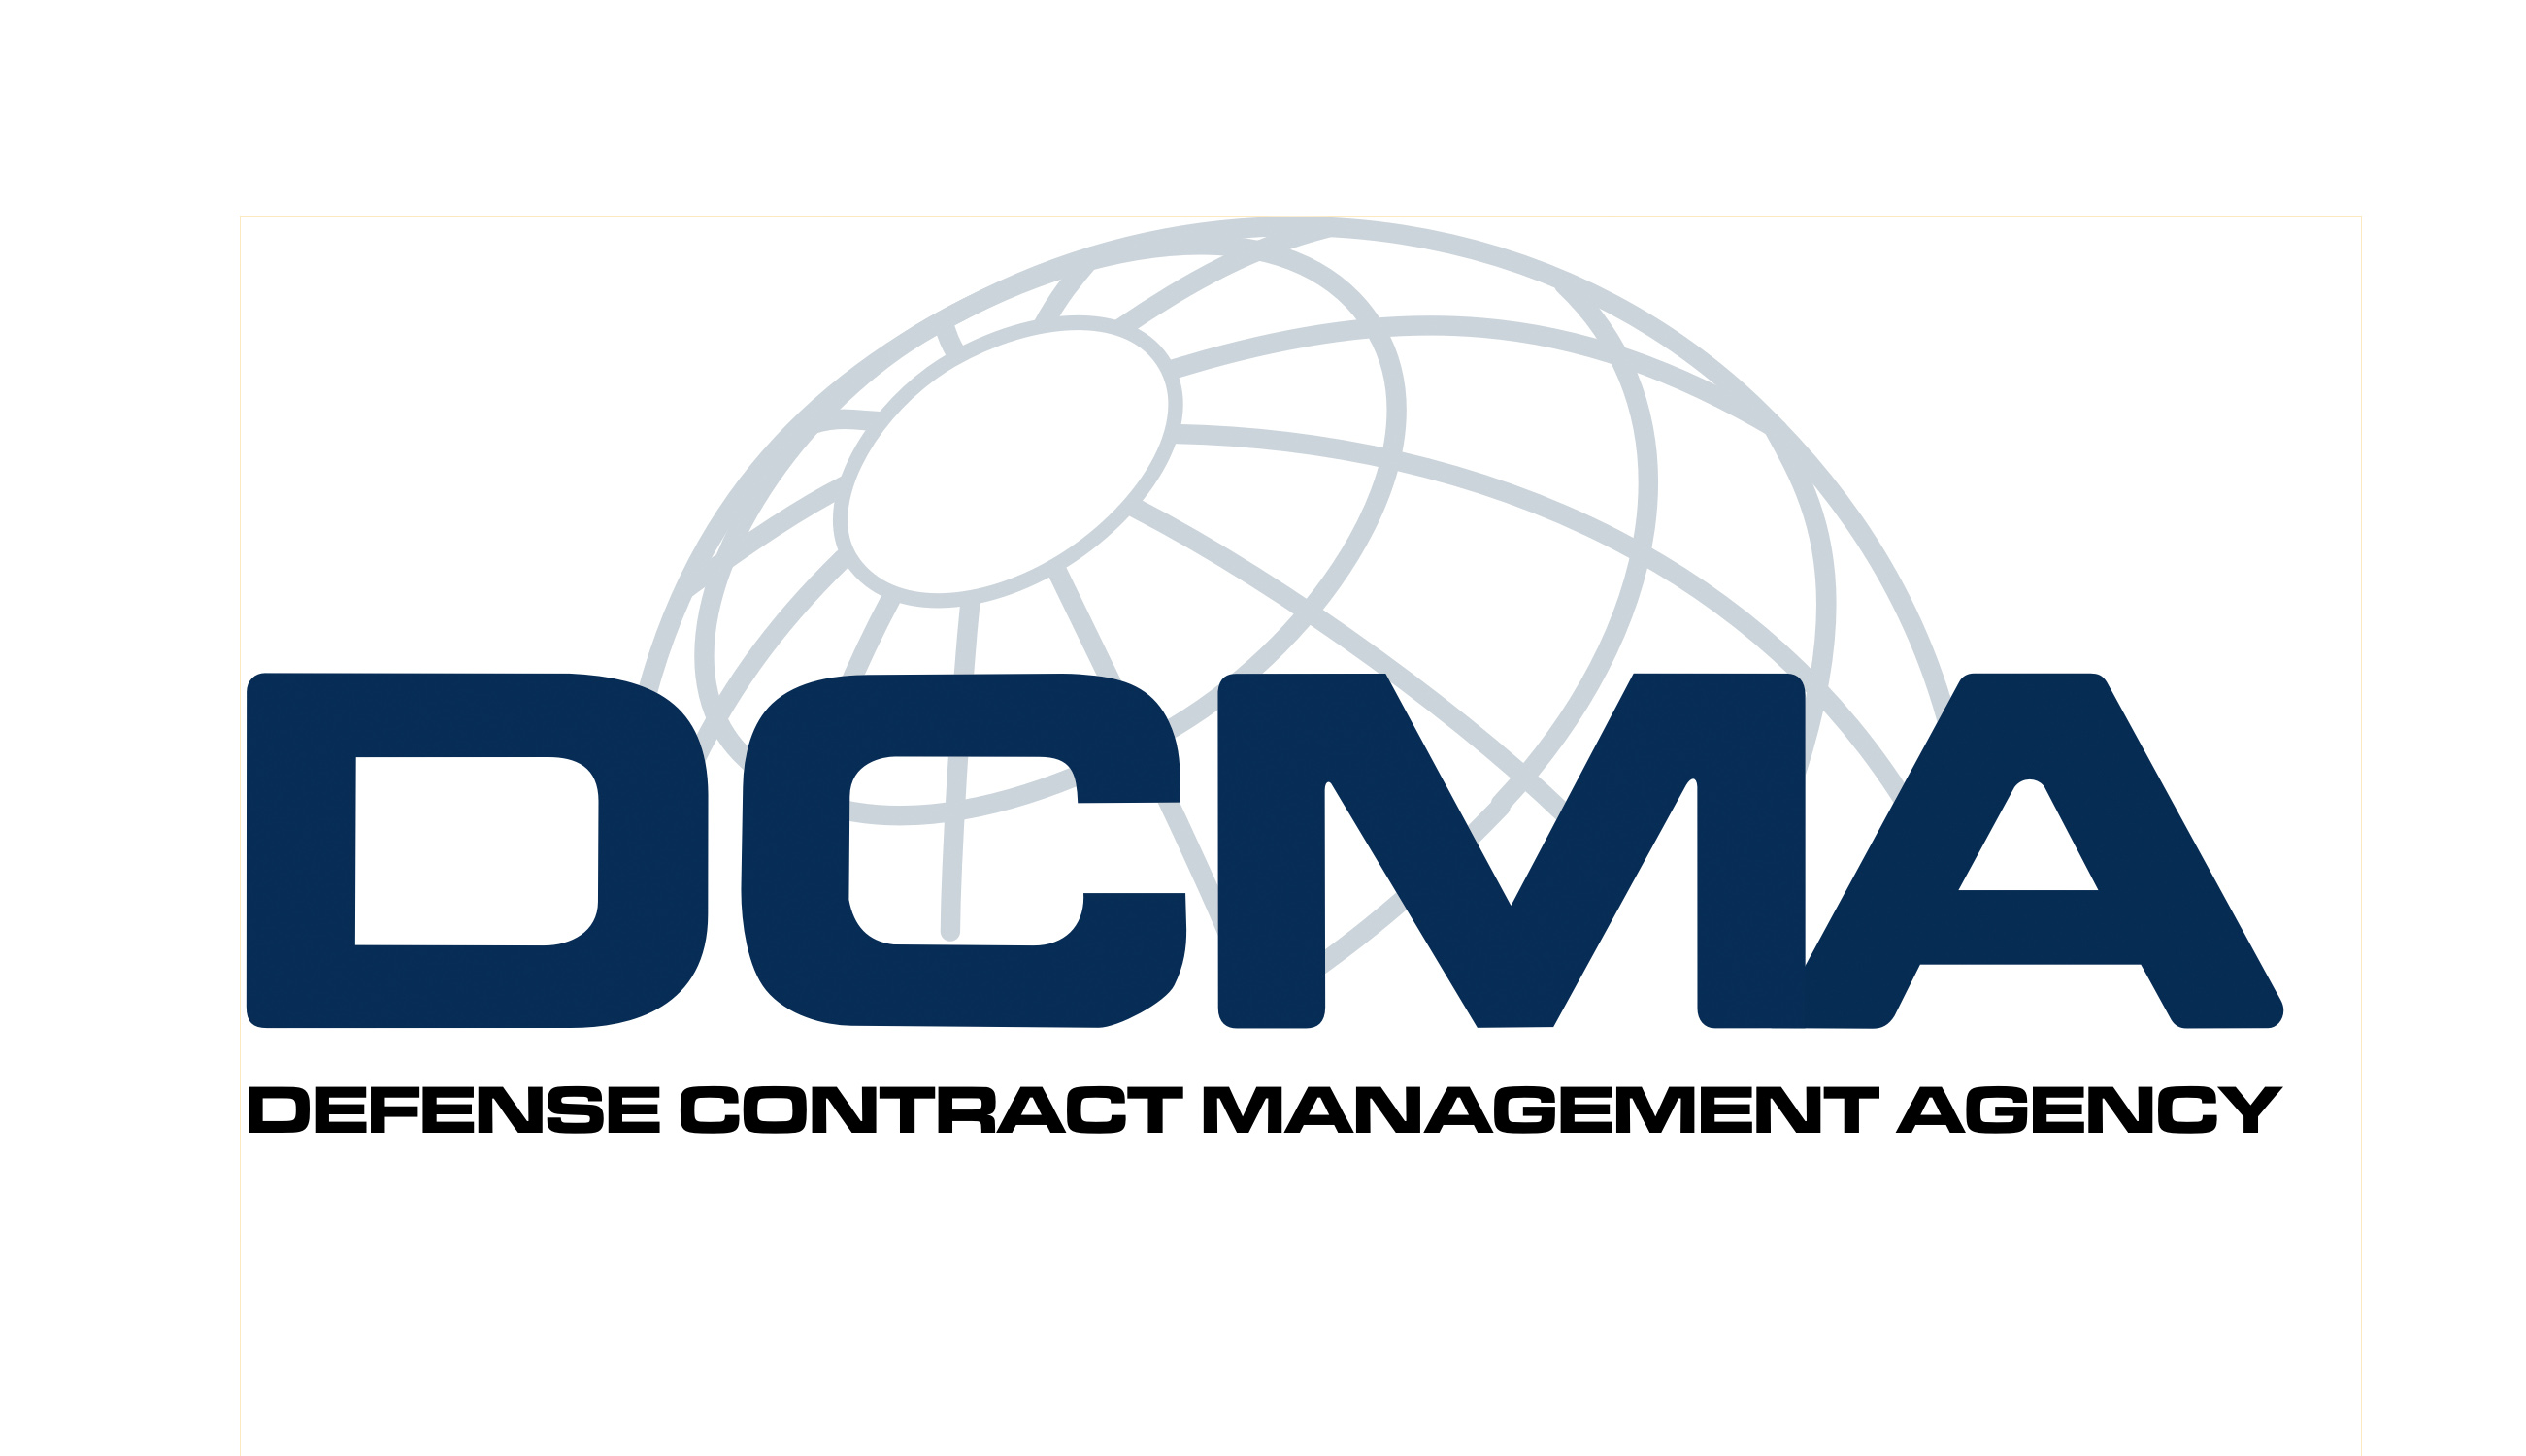 Management agency